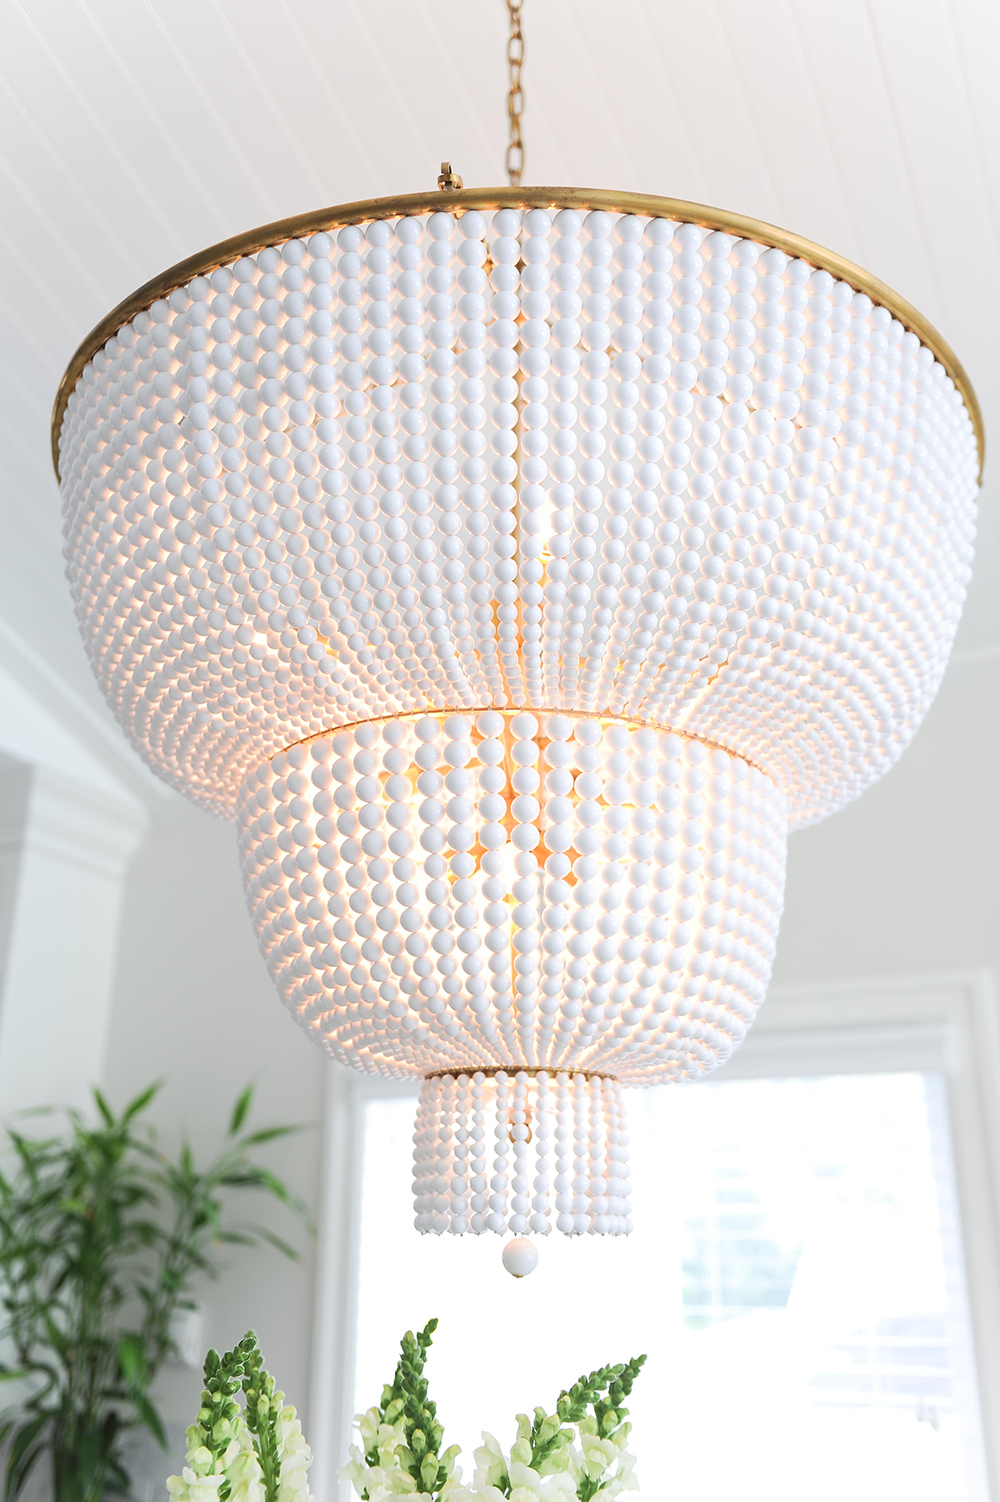 Two-tier chandelier with glass beads set on an antique frame.